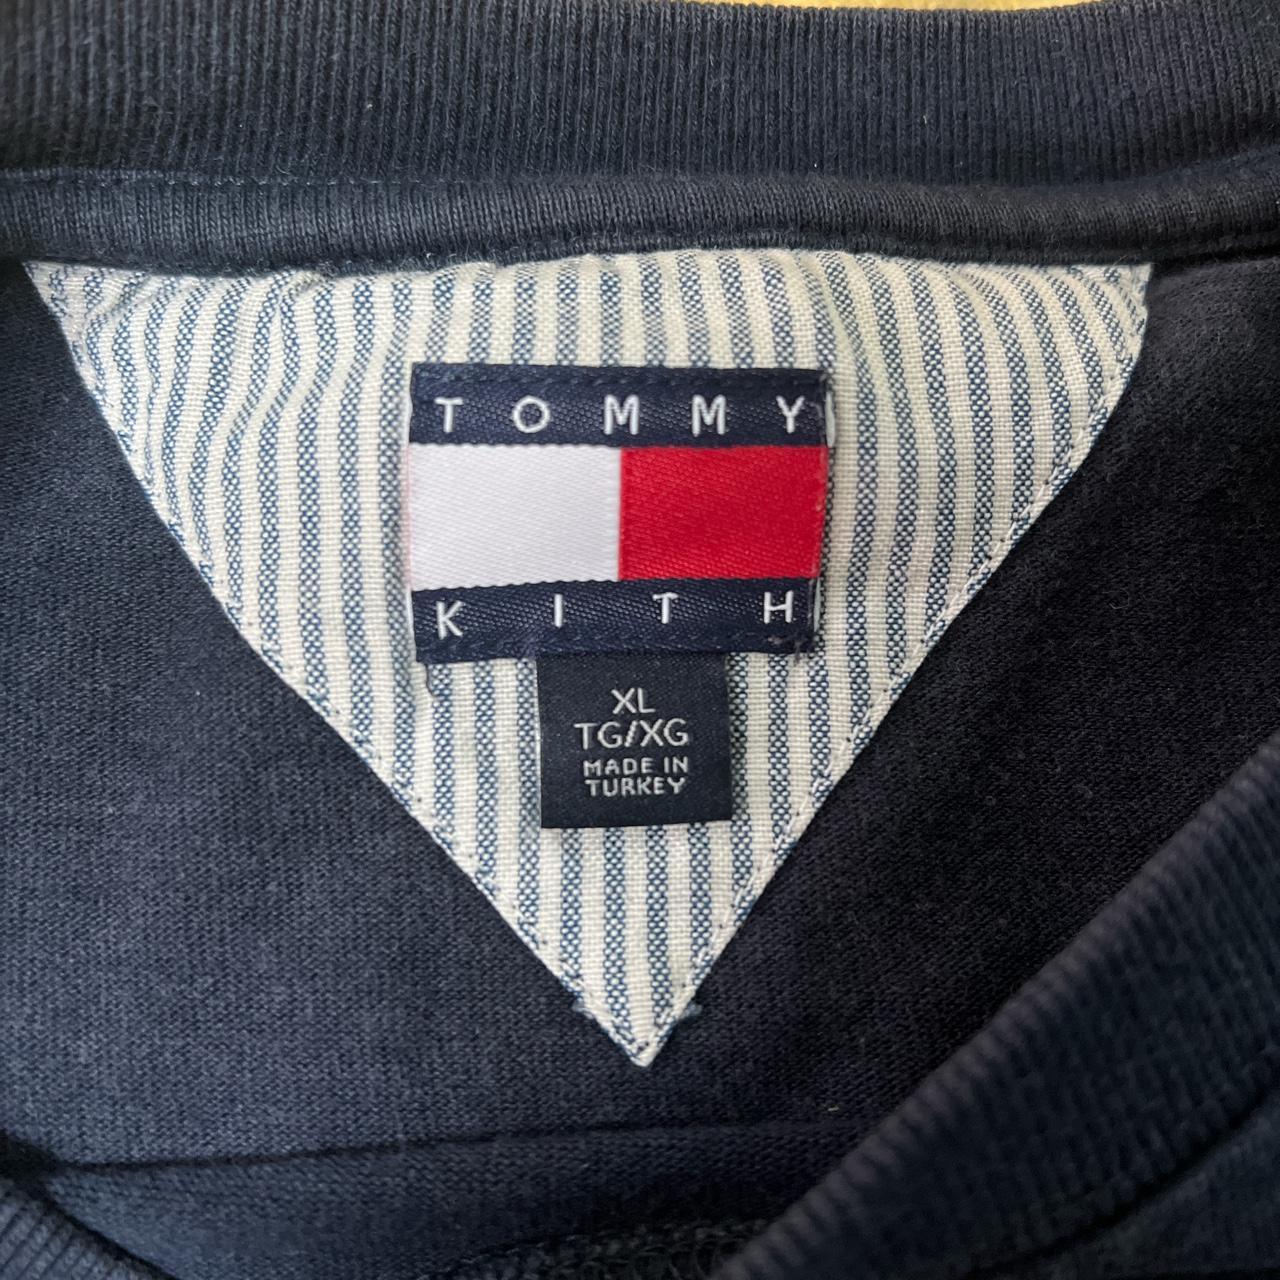 Tommy Hilfiger x Kith Collab Long Sleeve Tee Size XL - Depop